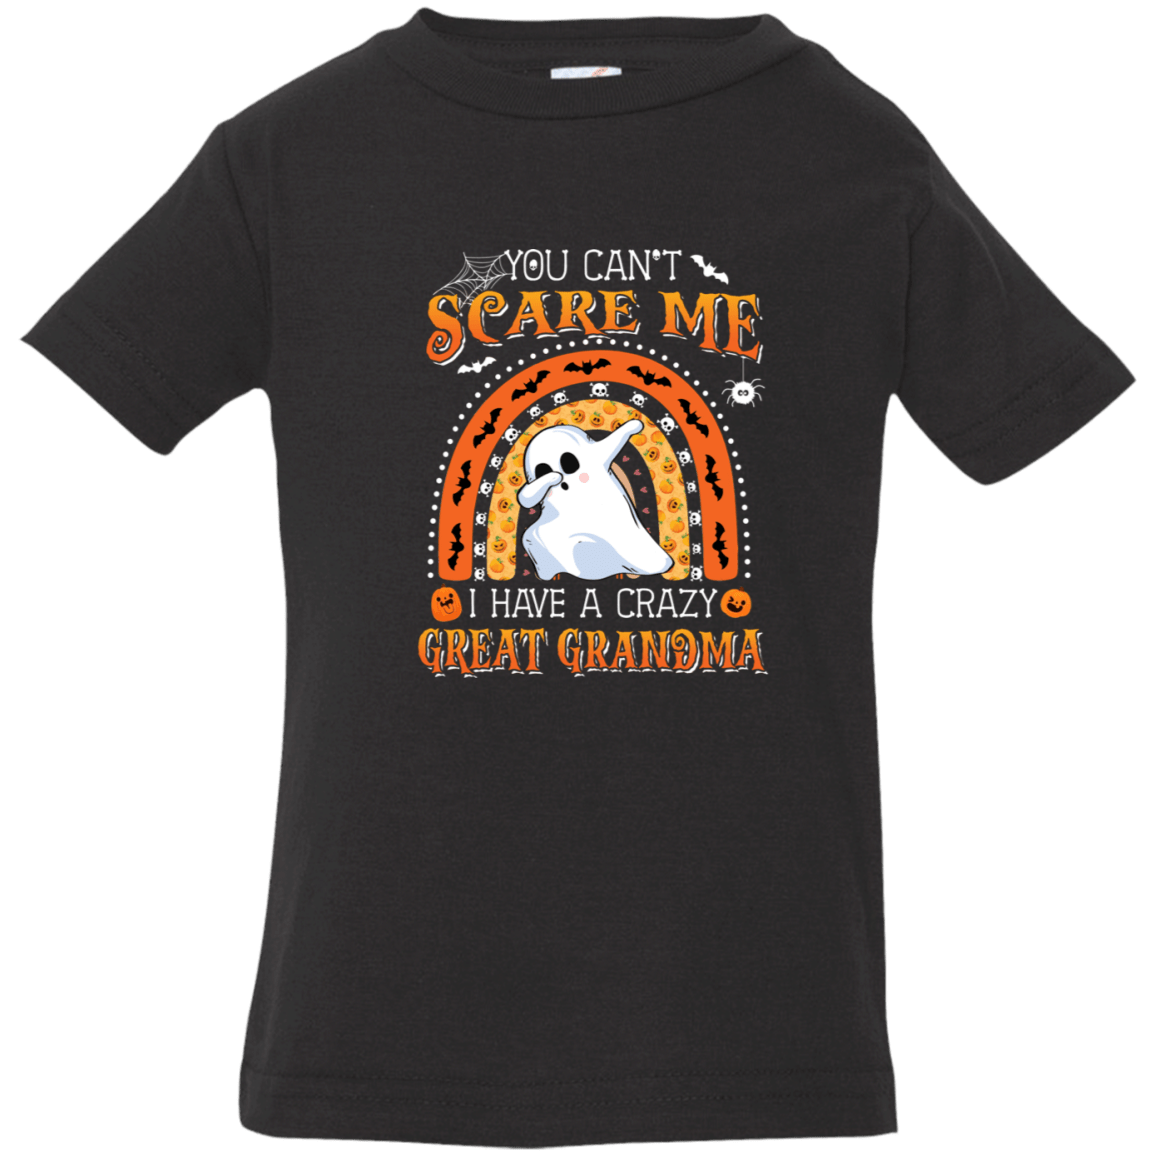 You Can't Scare Me Infant Jersey T-Shirt